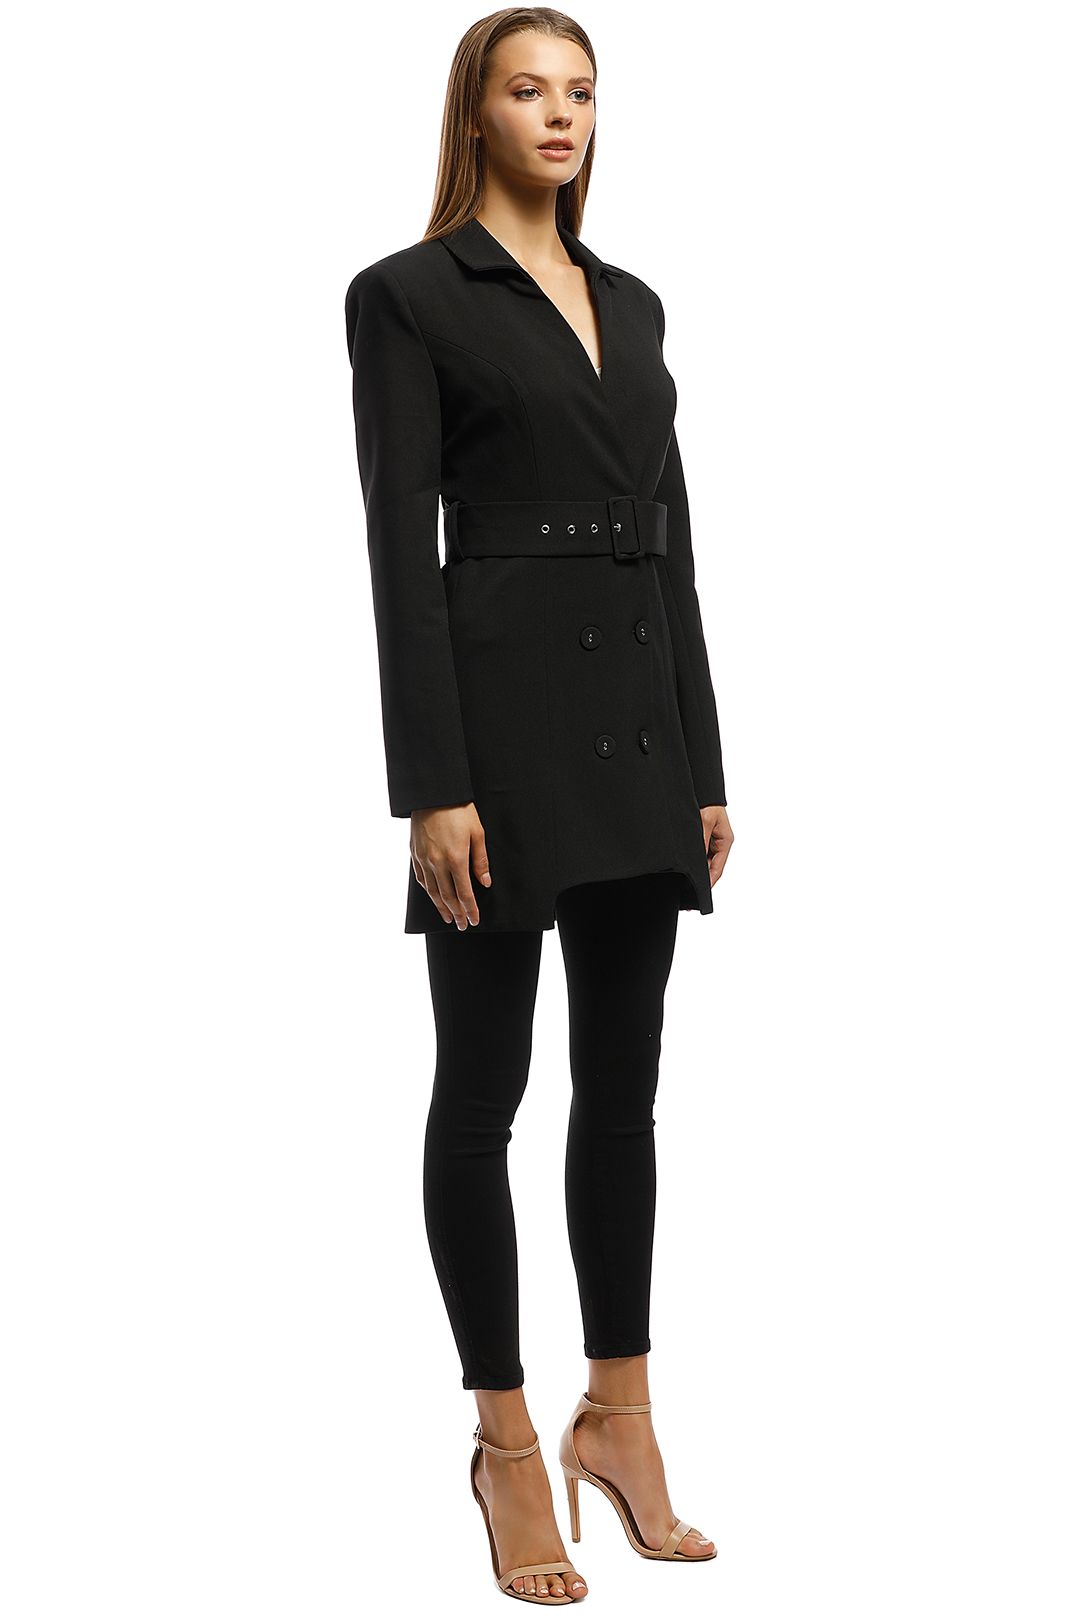 CMEO Collective - Mode LS Dress - Black - Side